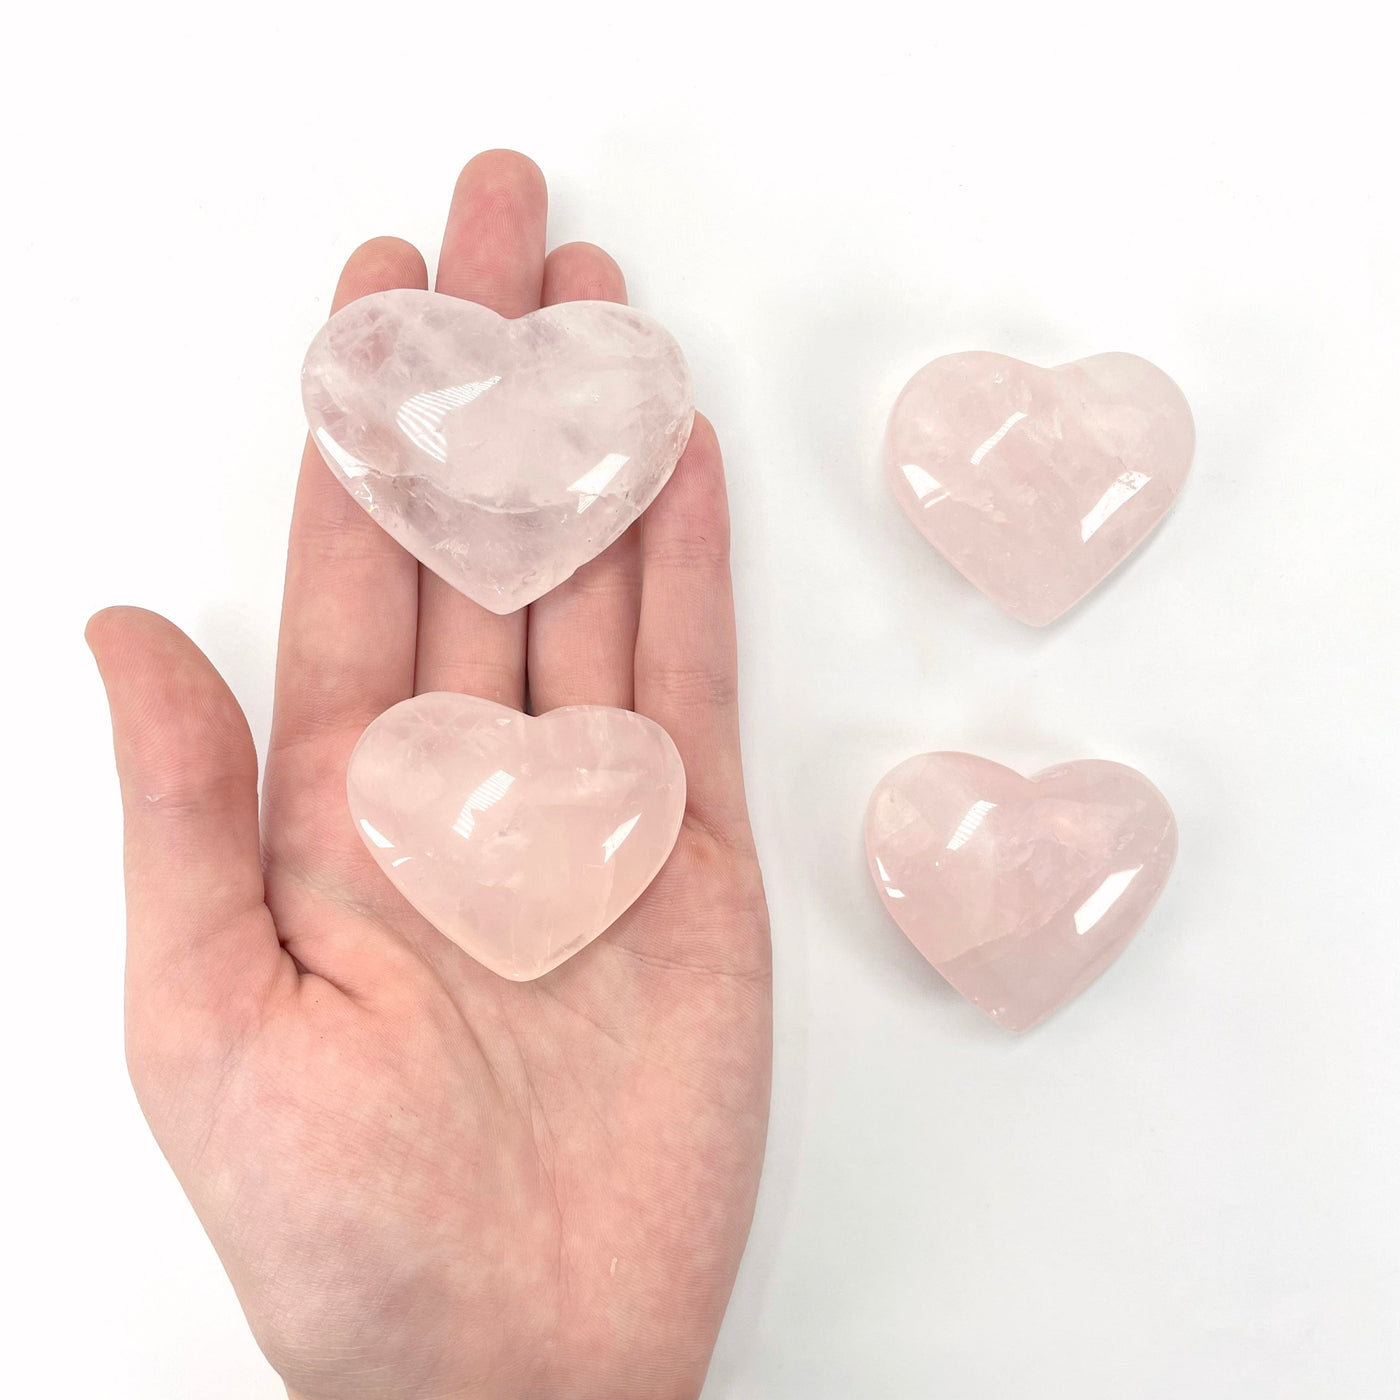 rose quartz polished hearts in hand and on display